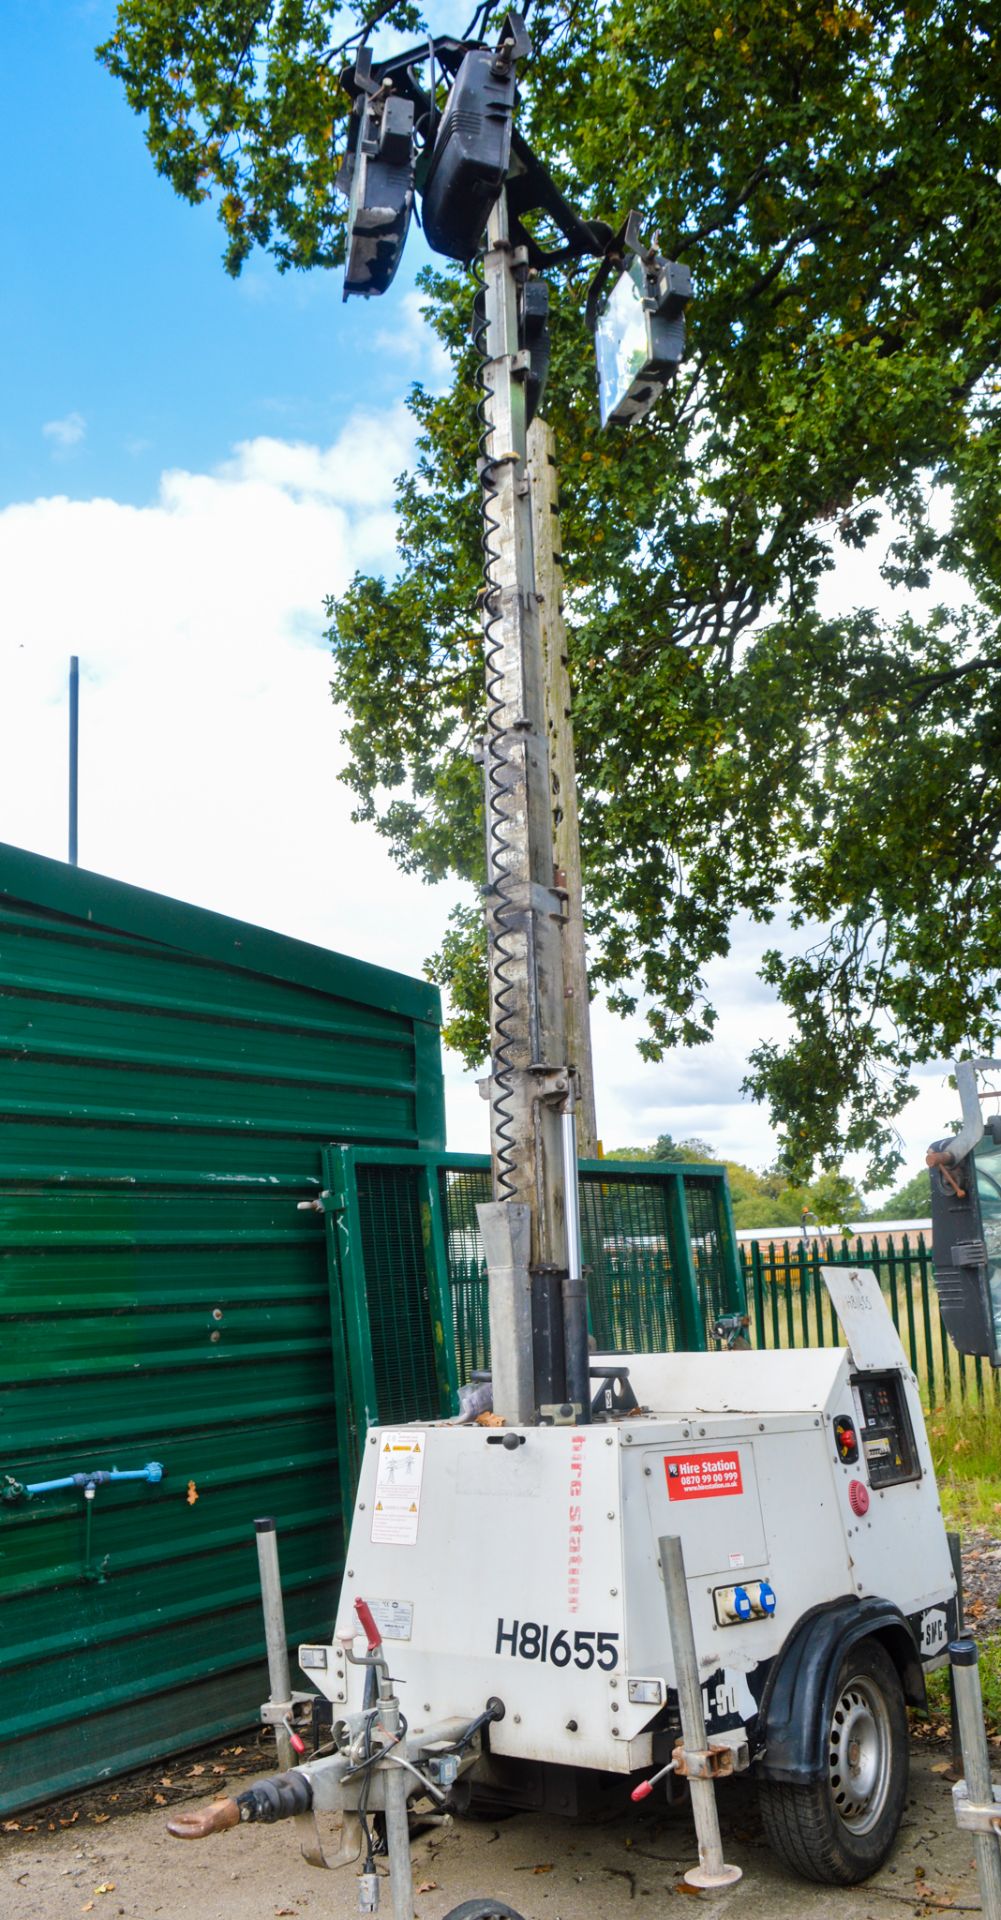 SMC TL90 diesel driven lighting tower Year: 2008 S/N: 1428 Recorded Hours: 4059 H81655 - Image 3 of 4